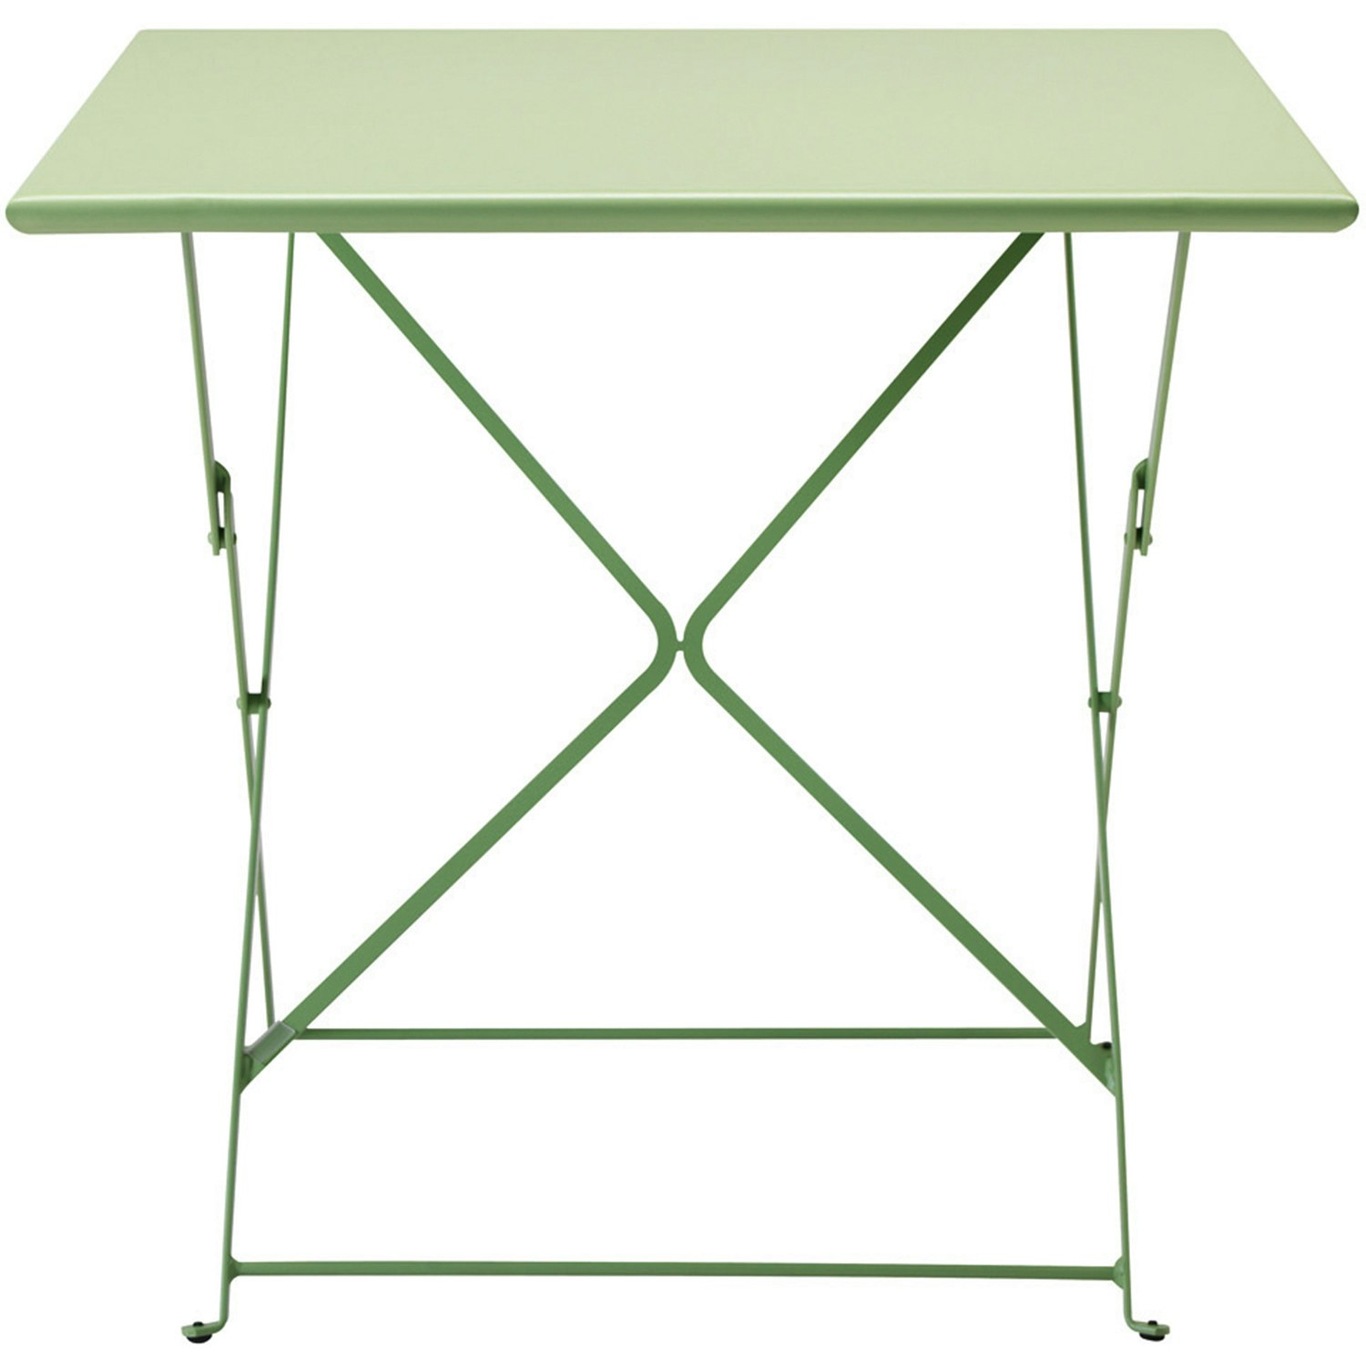 Flower Foldable Table 80x80 cm, Sage Green